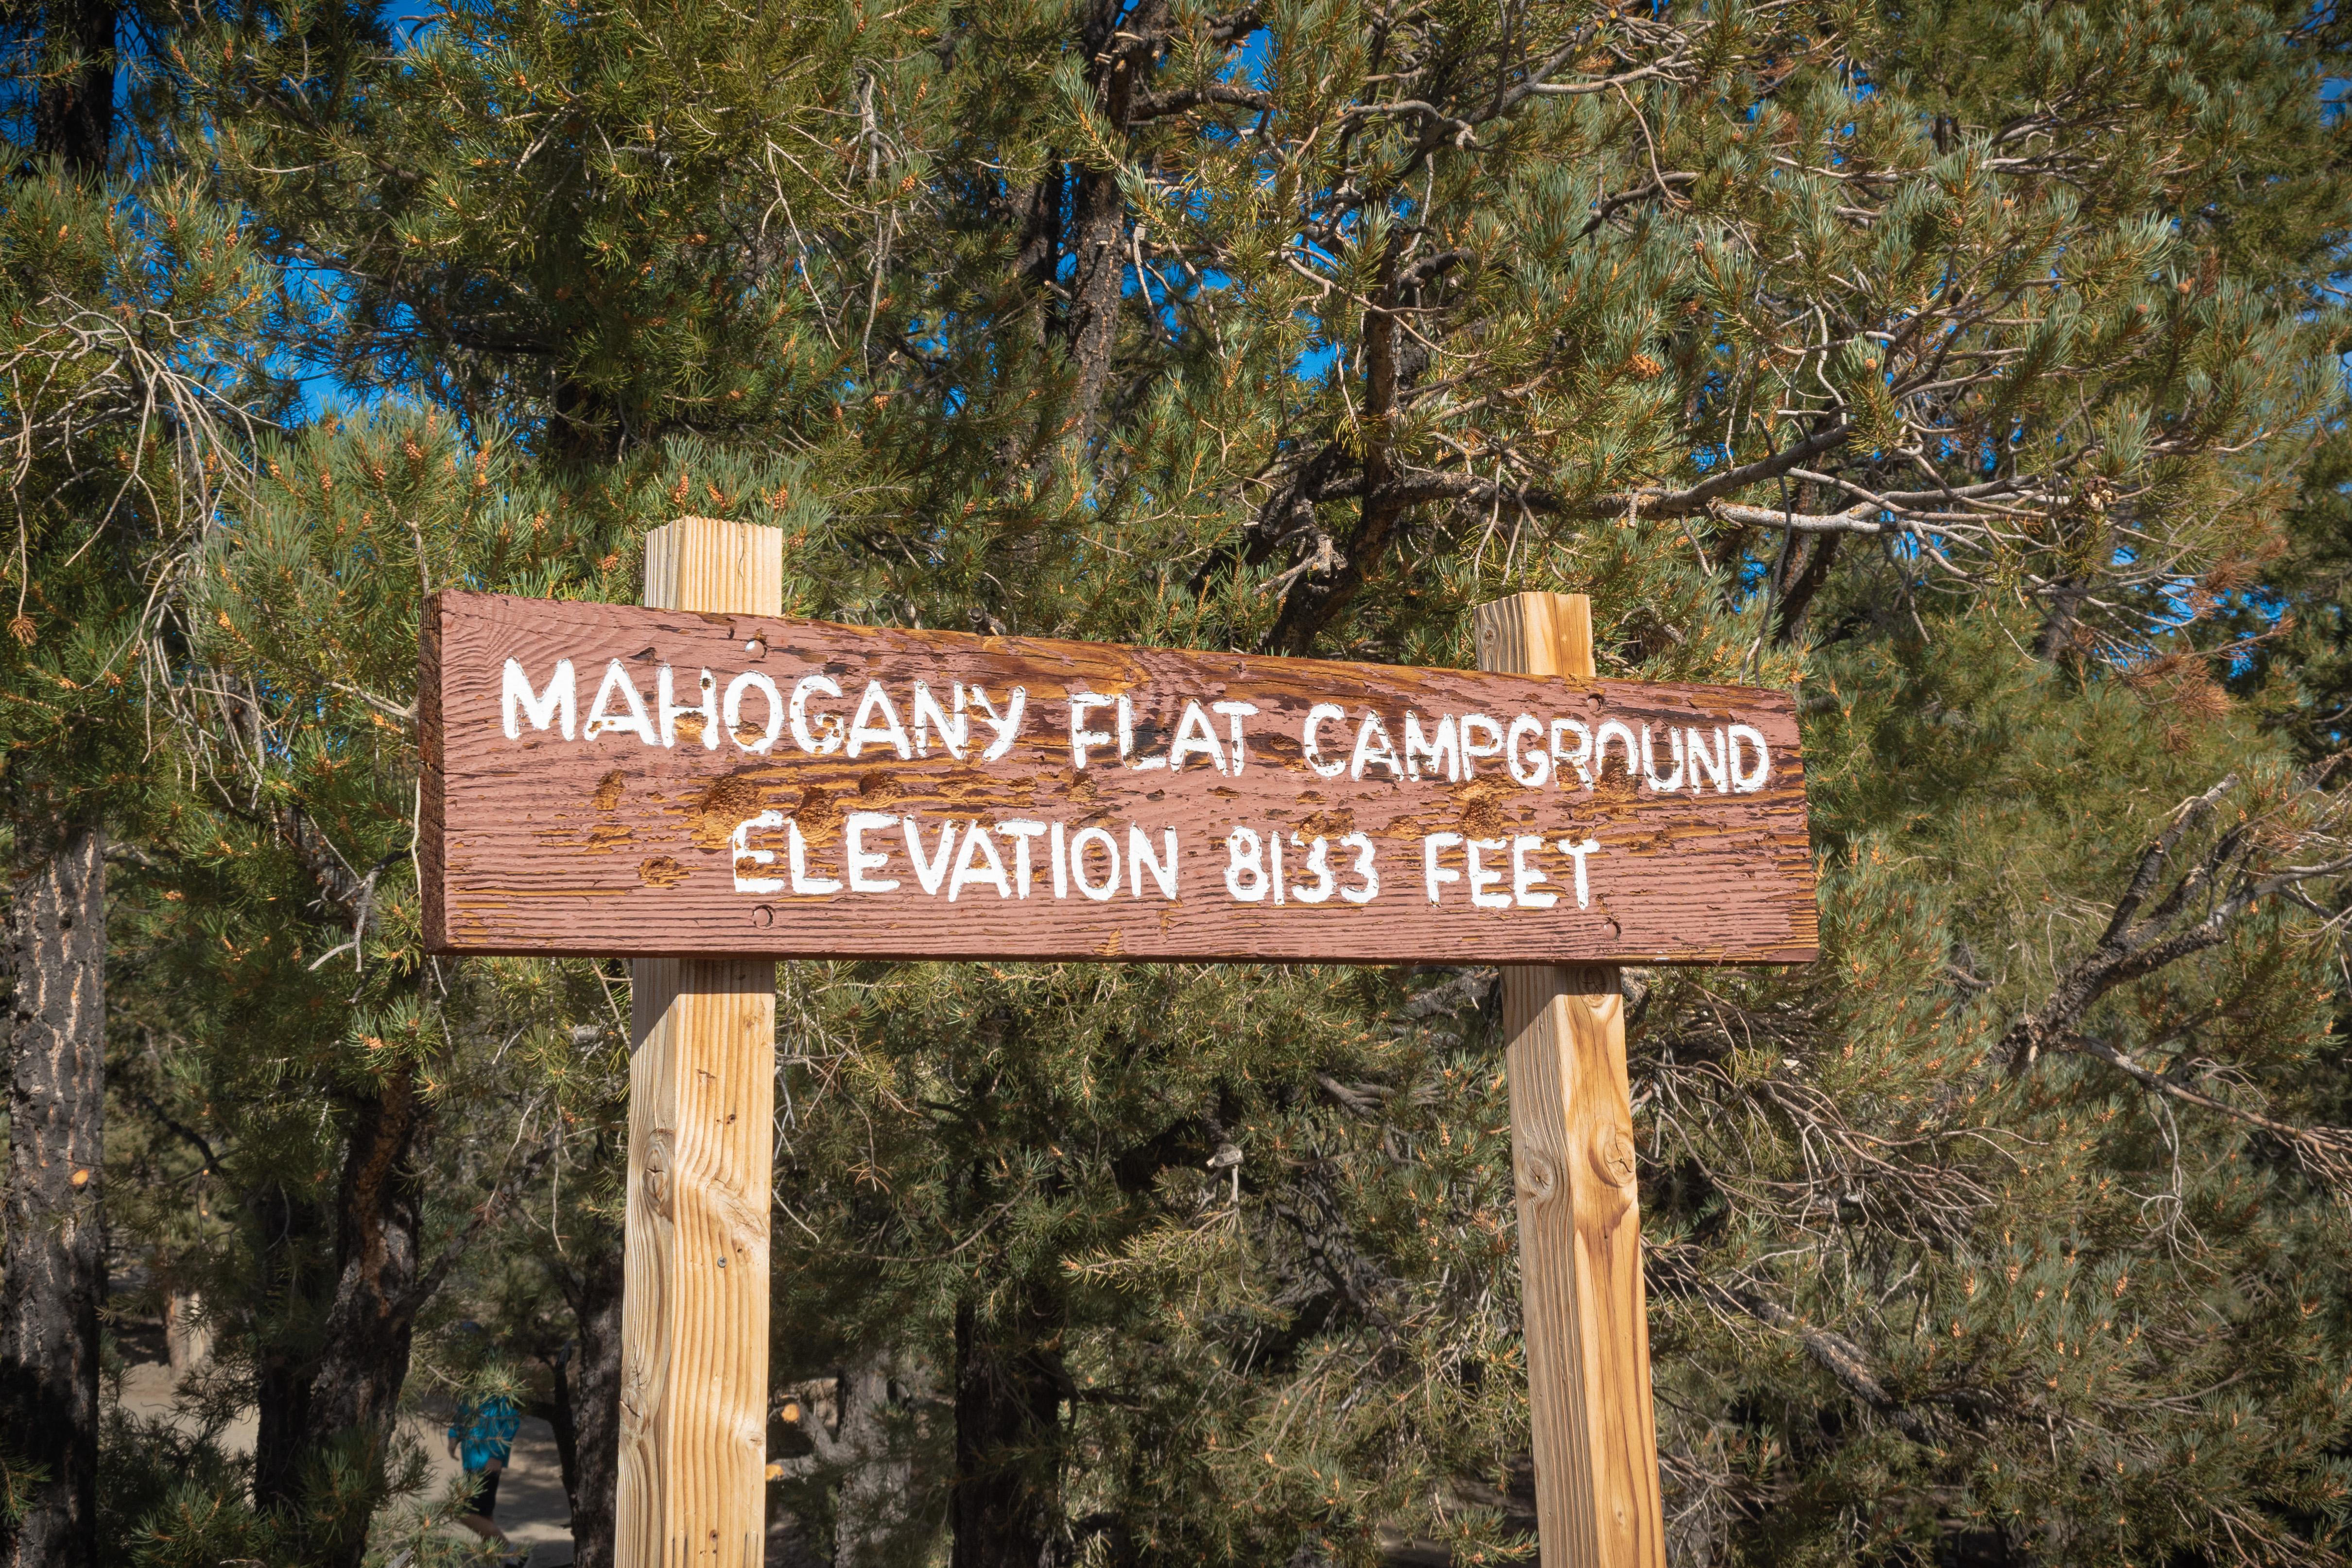 Pine trees surround wooden sign on wood posts reads Mahogany Flat Campground Elevation 8133 Feet.